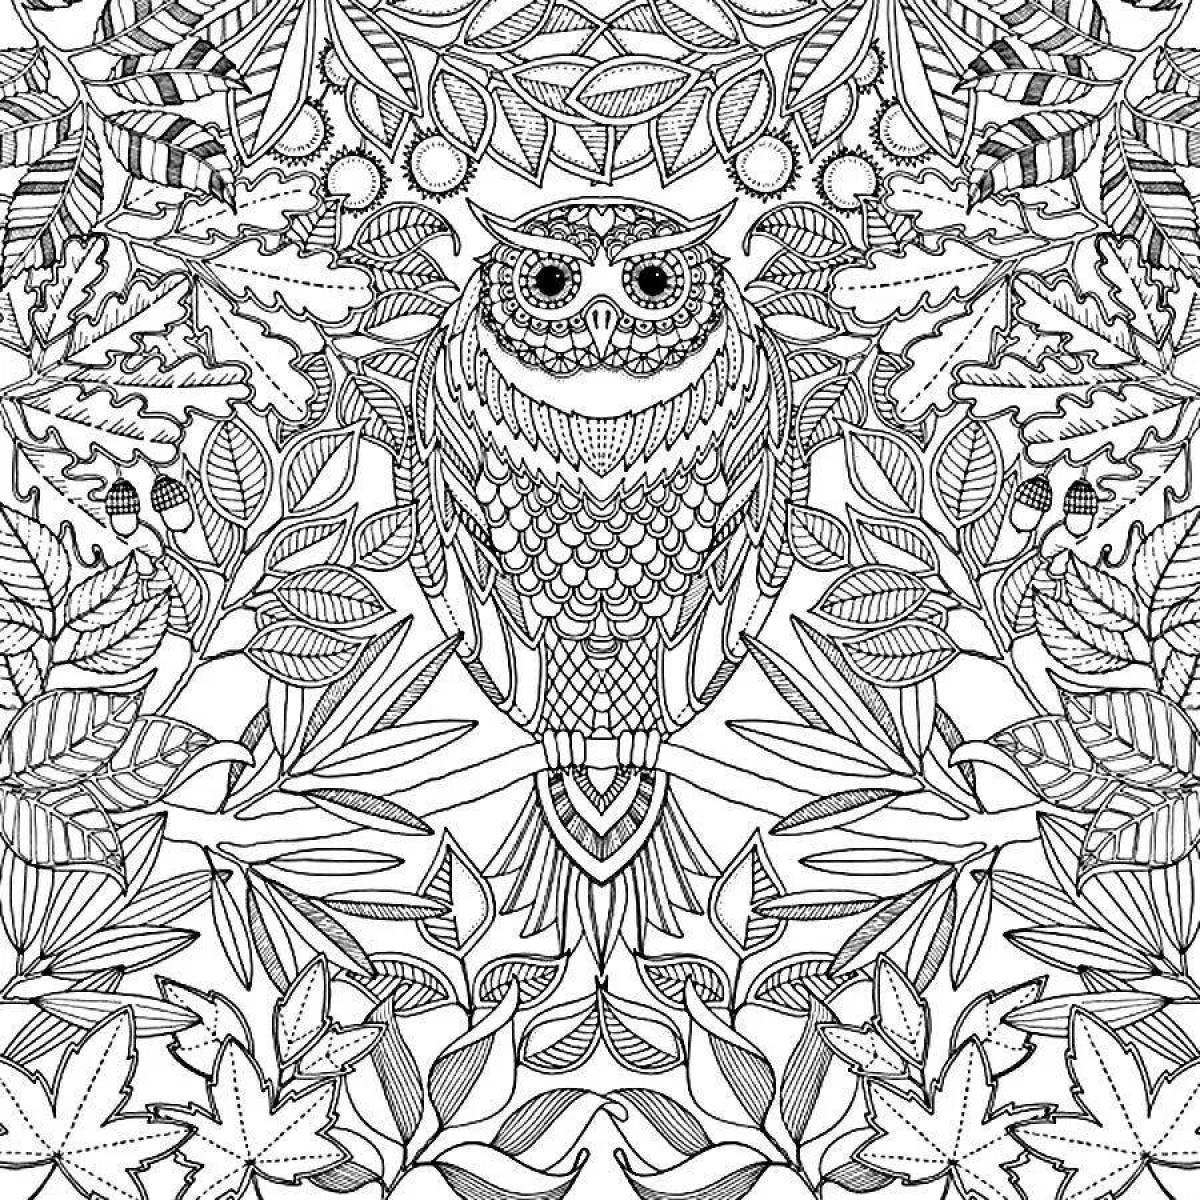 Adorable adult coloring book